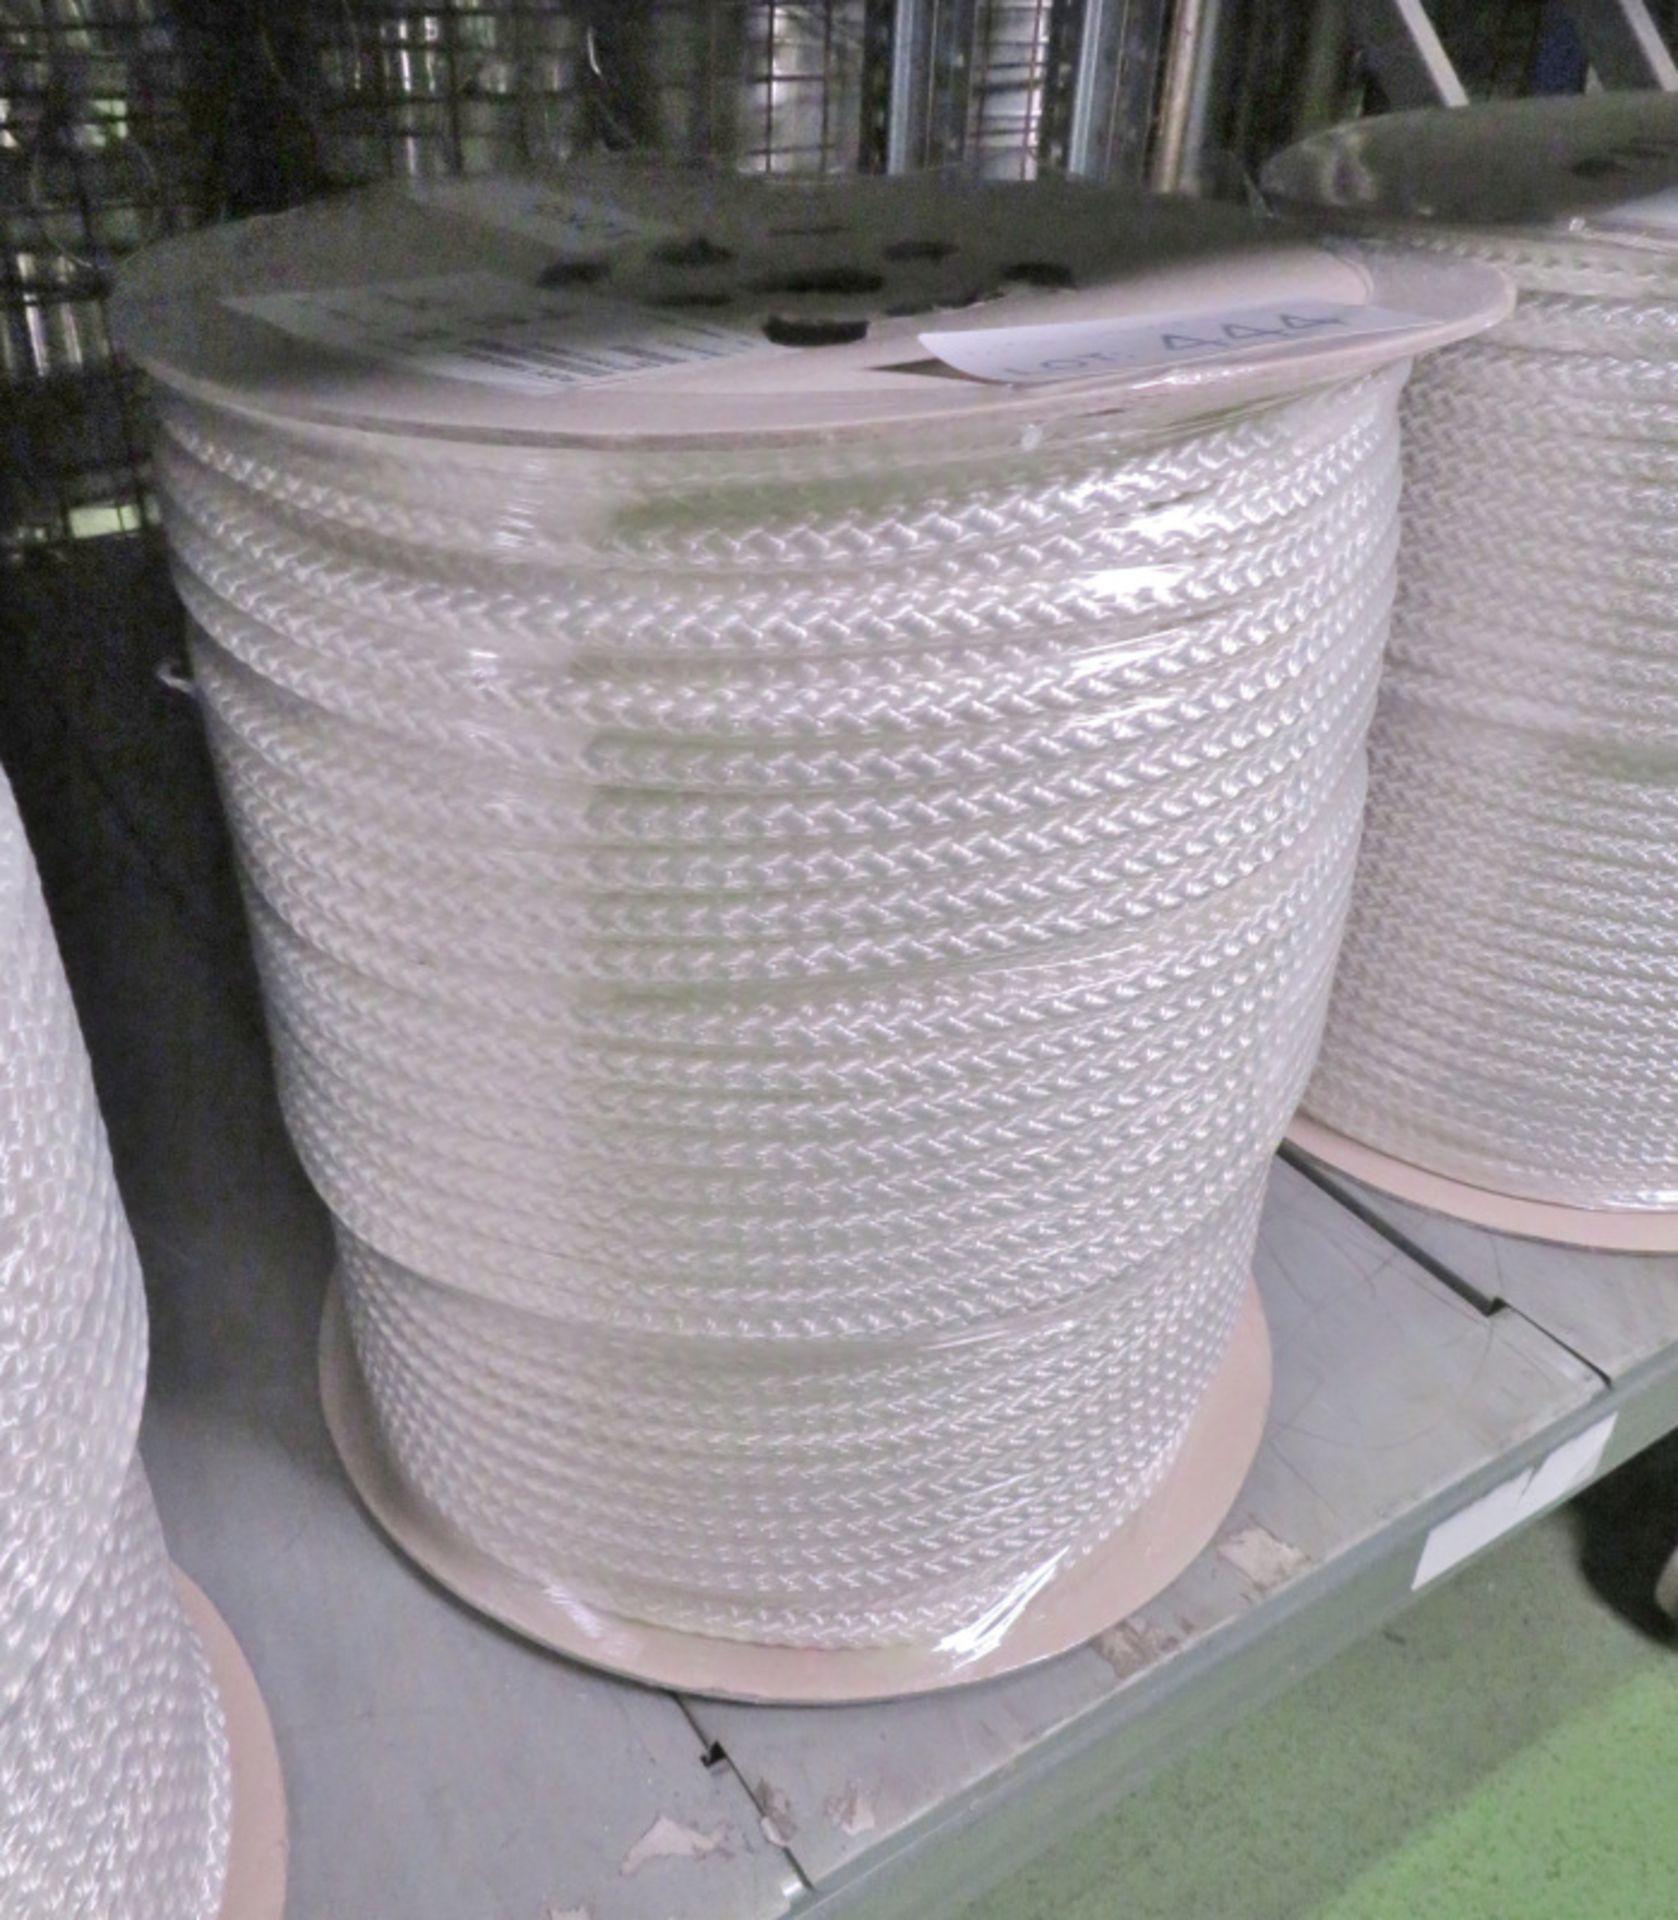 White Poly Fibrous Rope 220m x 9mm - NSN 4020-99-120-8692 - weight 12kg